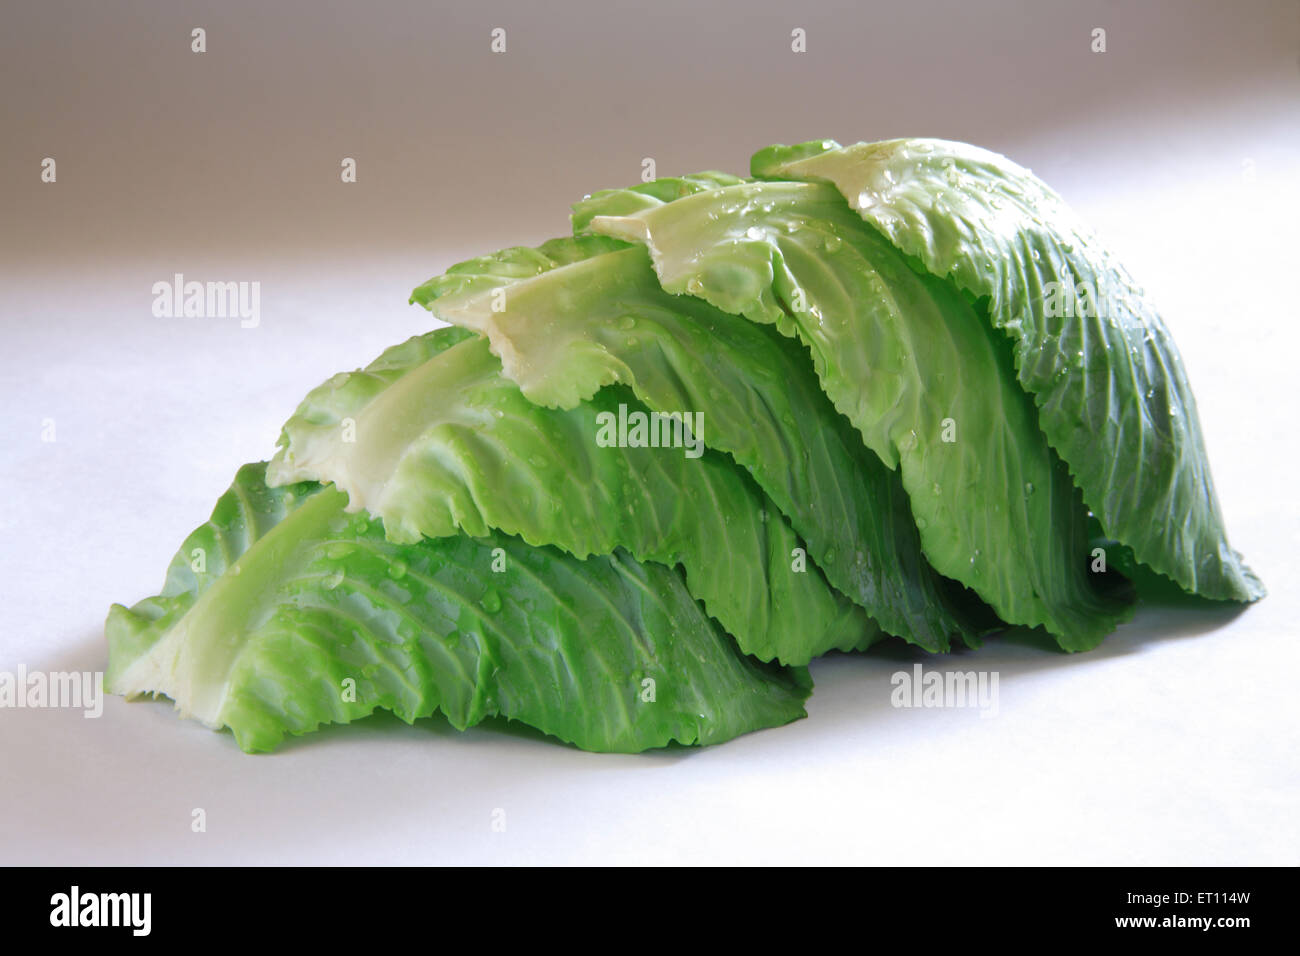 Green vegetable ; water drops on pattagobi cabbage on white background Stock Photo